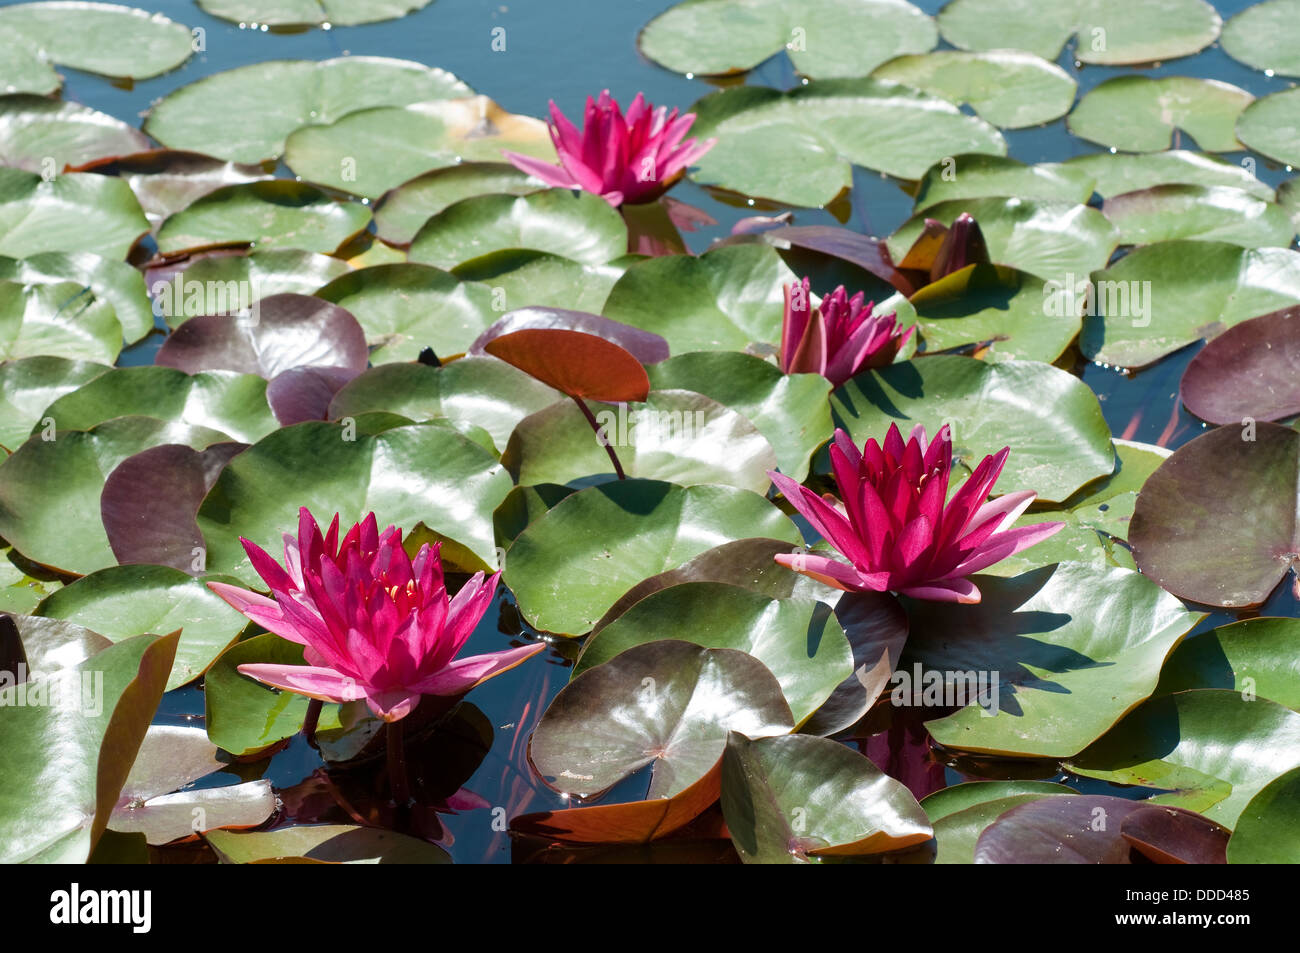 Seerose, Nymphaea "Perrys roter Stern" Stockfoto